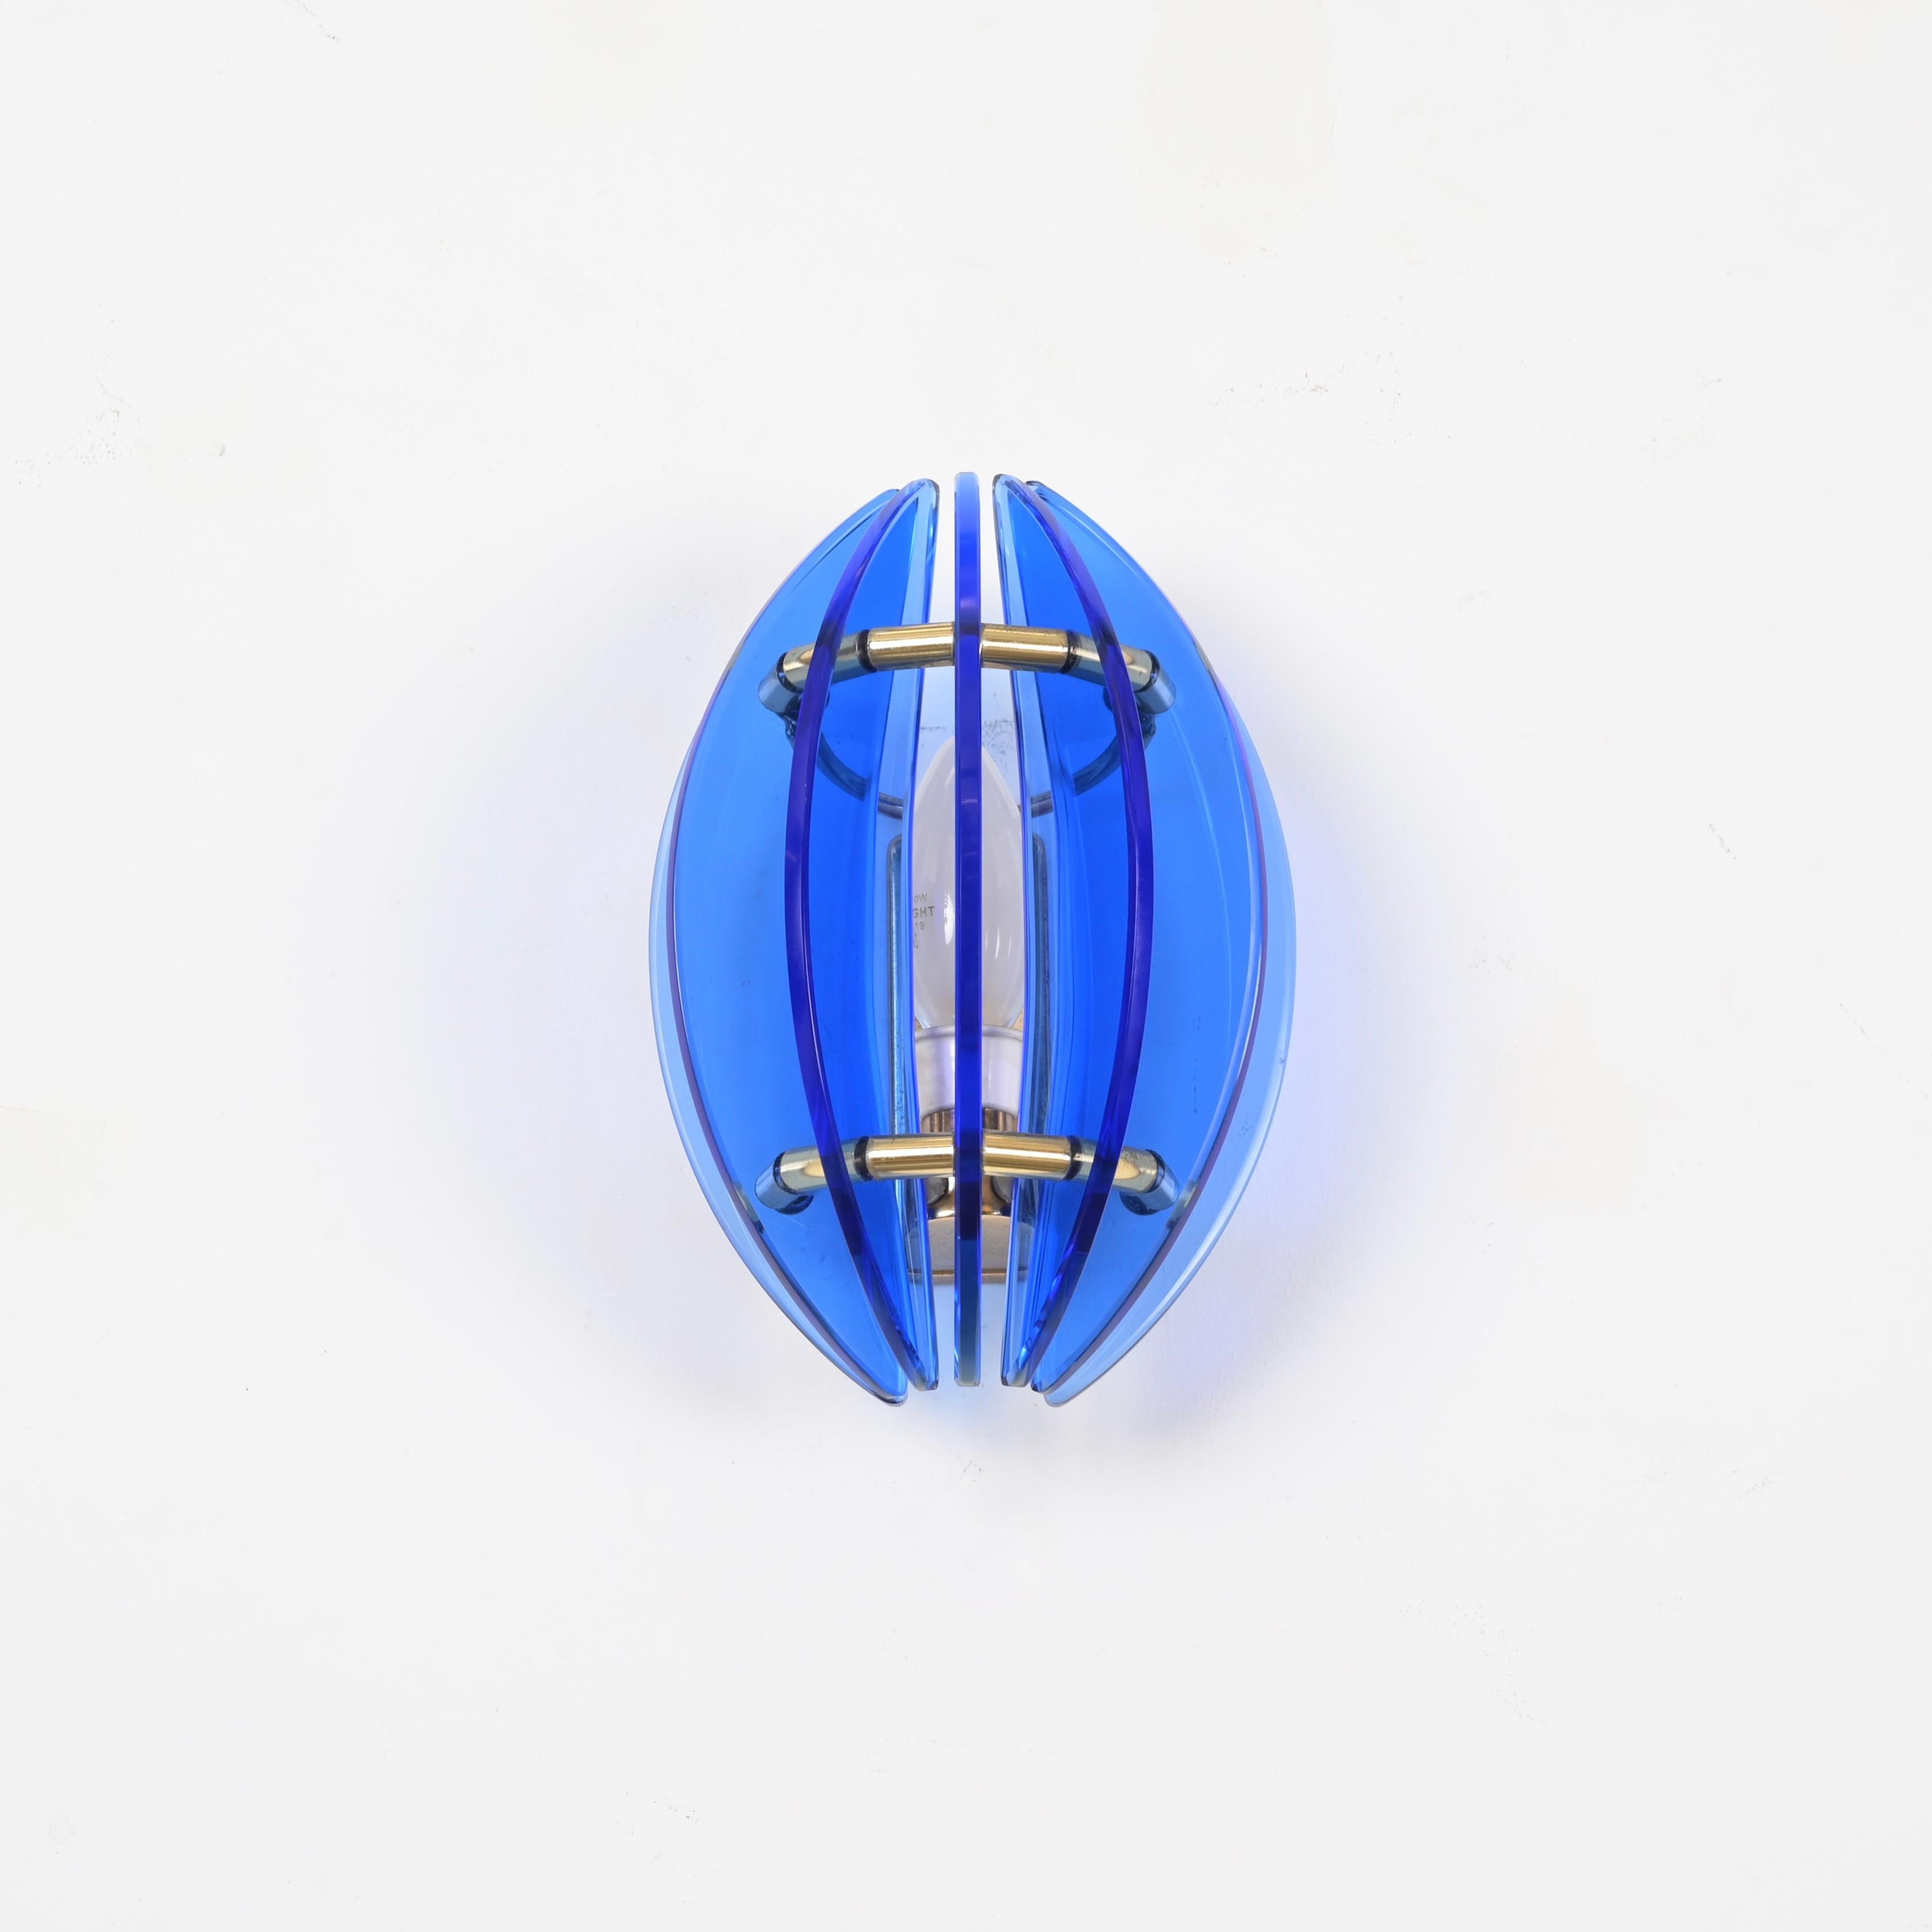 Mid-Century Modern Brass and Murano Blue Glass Wall Sconce by Galvorame, Italy Lighting, 1970s For Sale